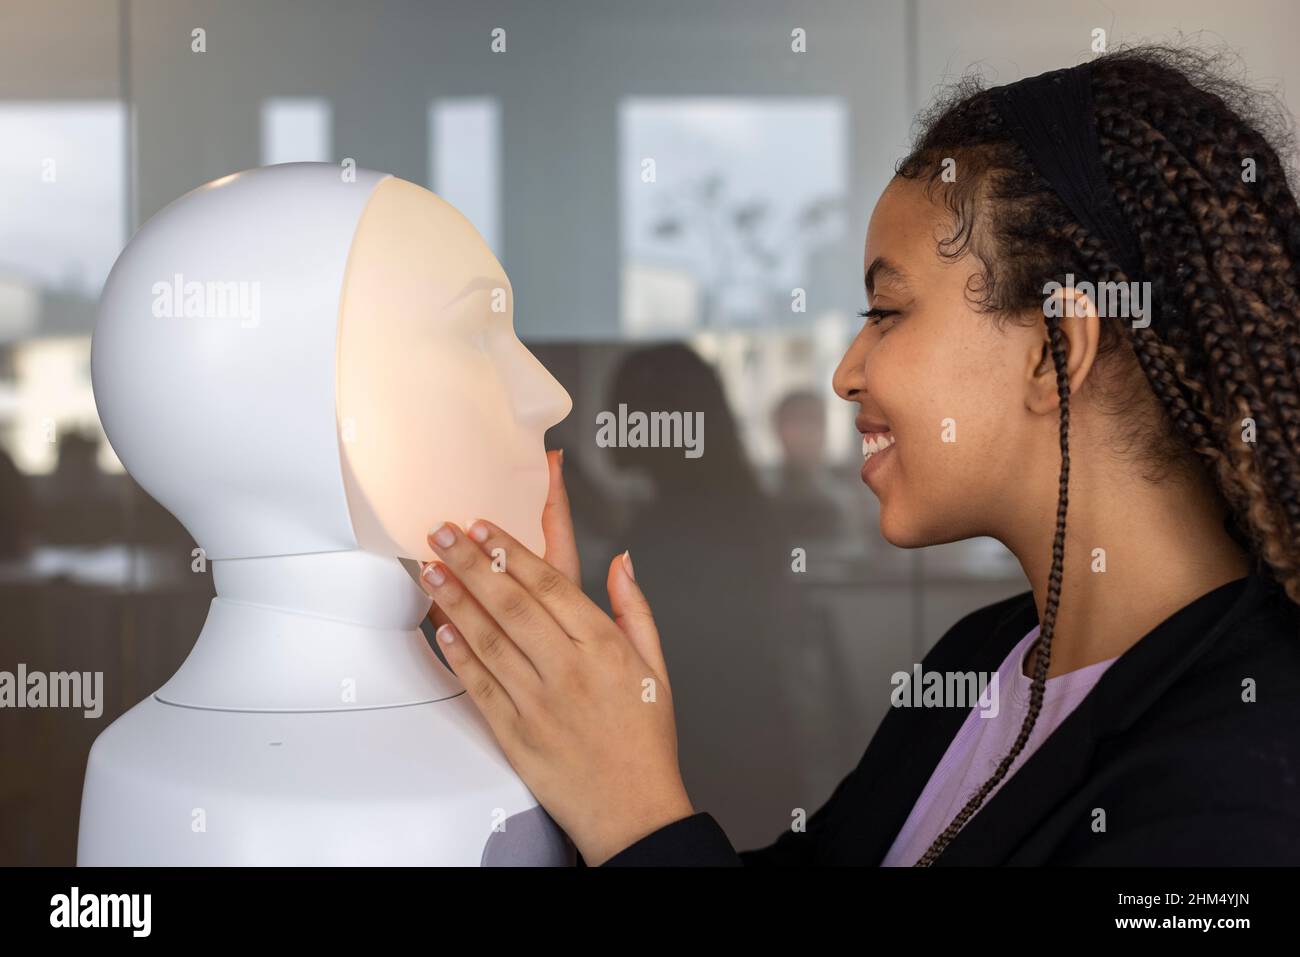 Smiling woman looking at robot voice assistant Stock Photo